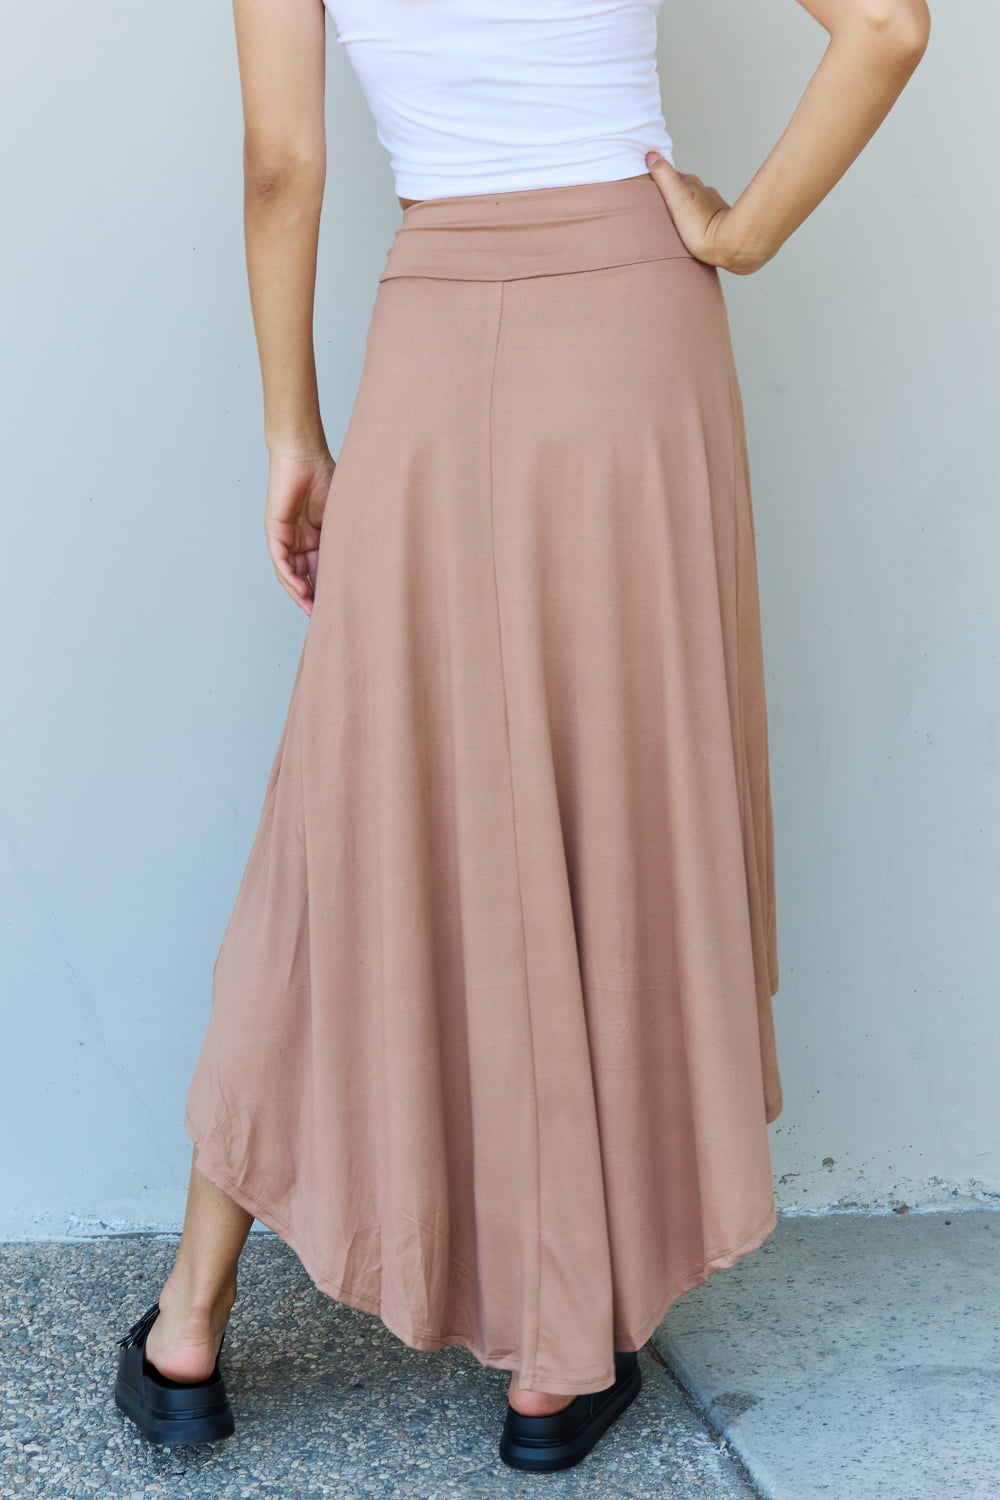 Dark Gray Ninexis First Choice High Waisted Flare Maxi Skirt in Camel Sentient Beauty Fashions Apparel & Accessories